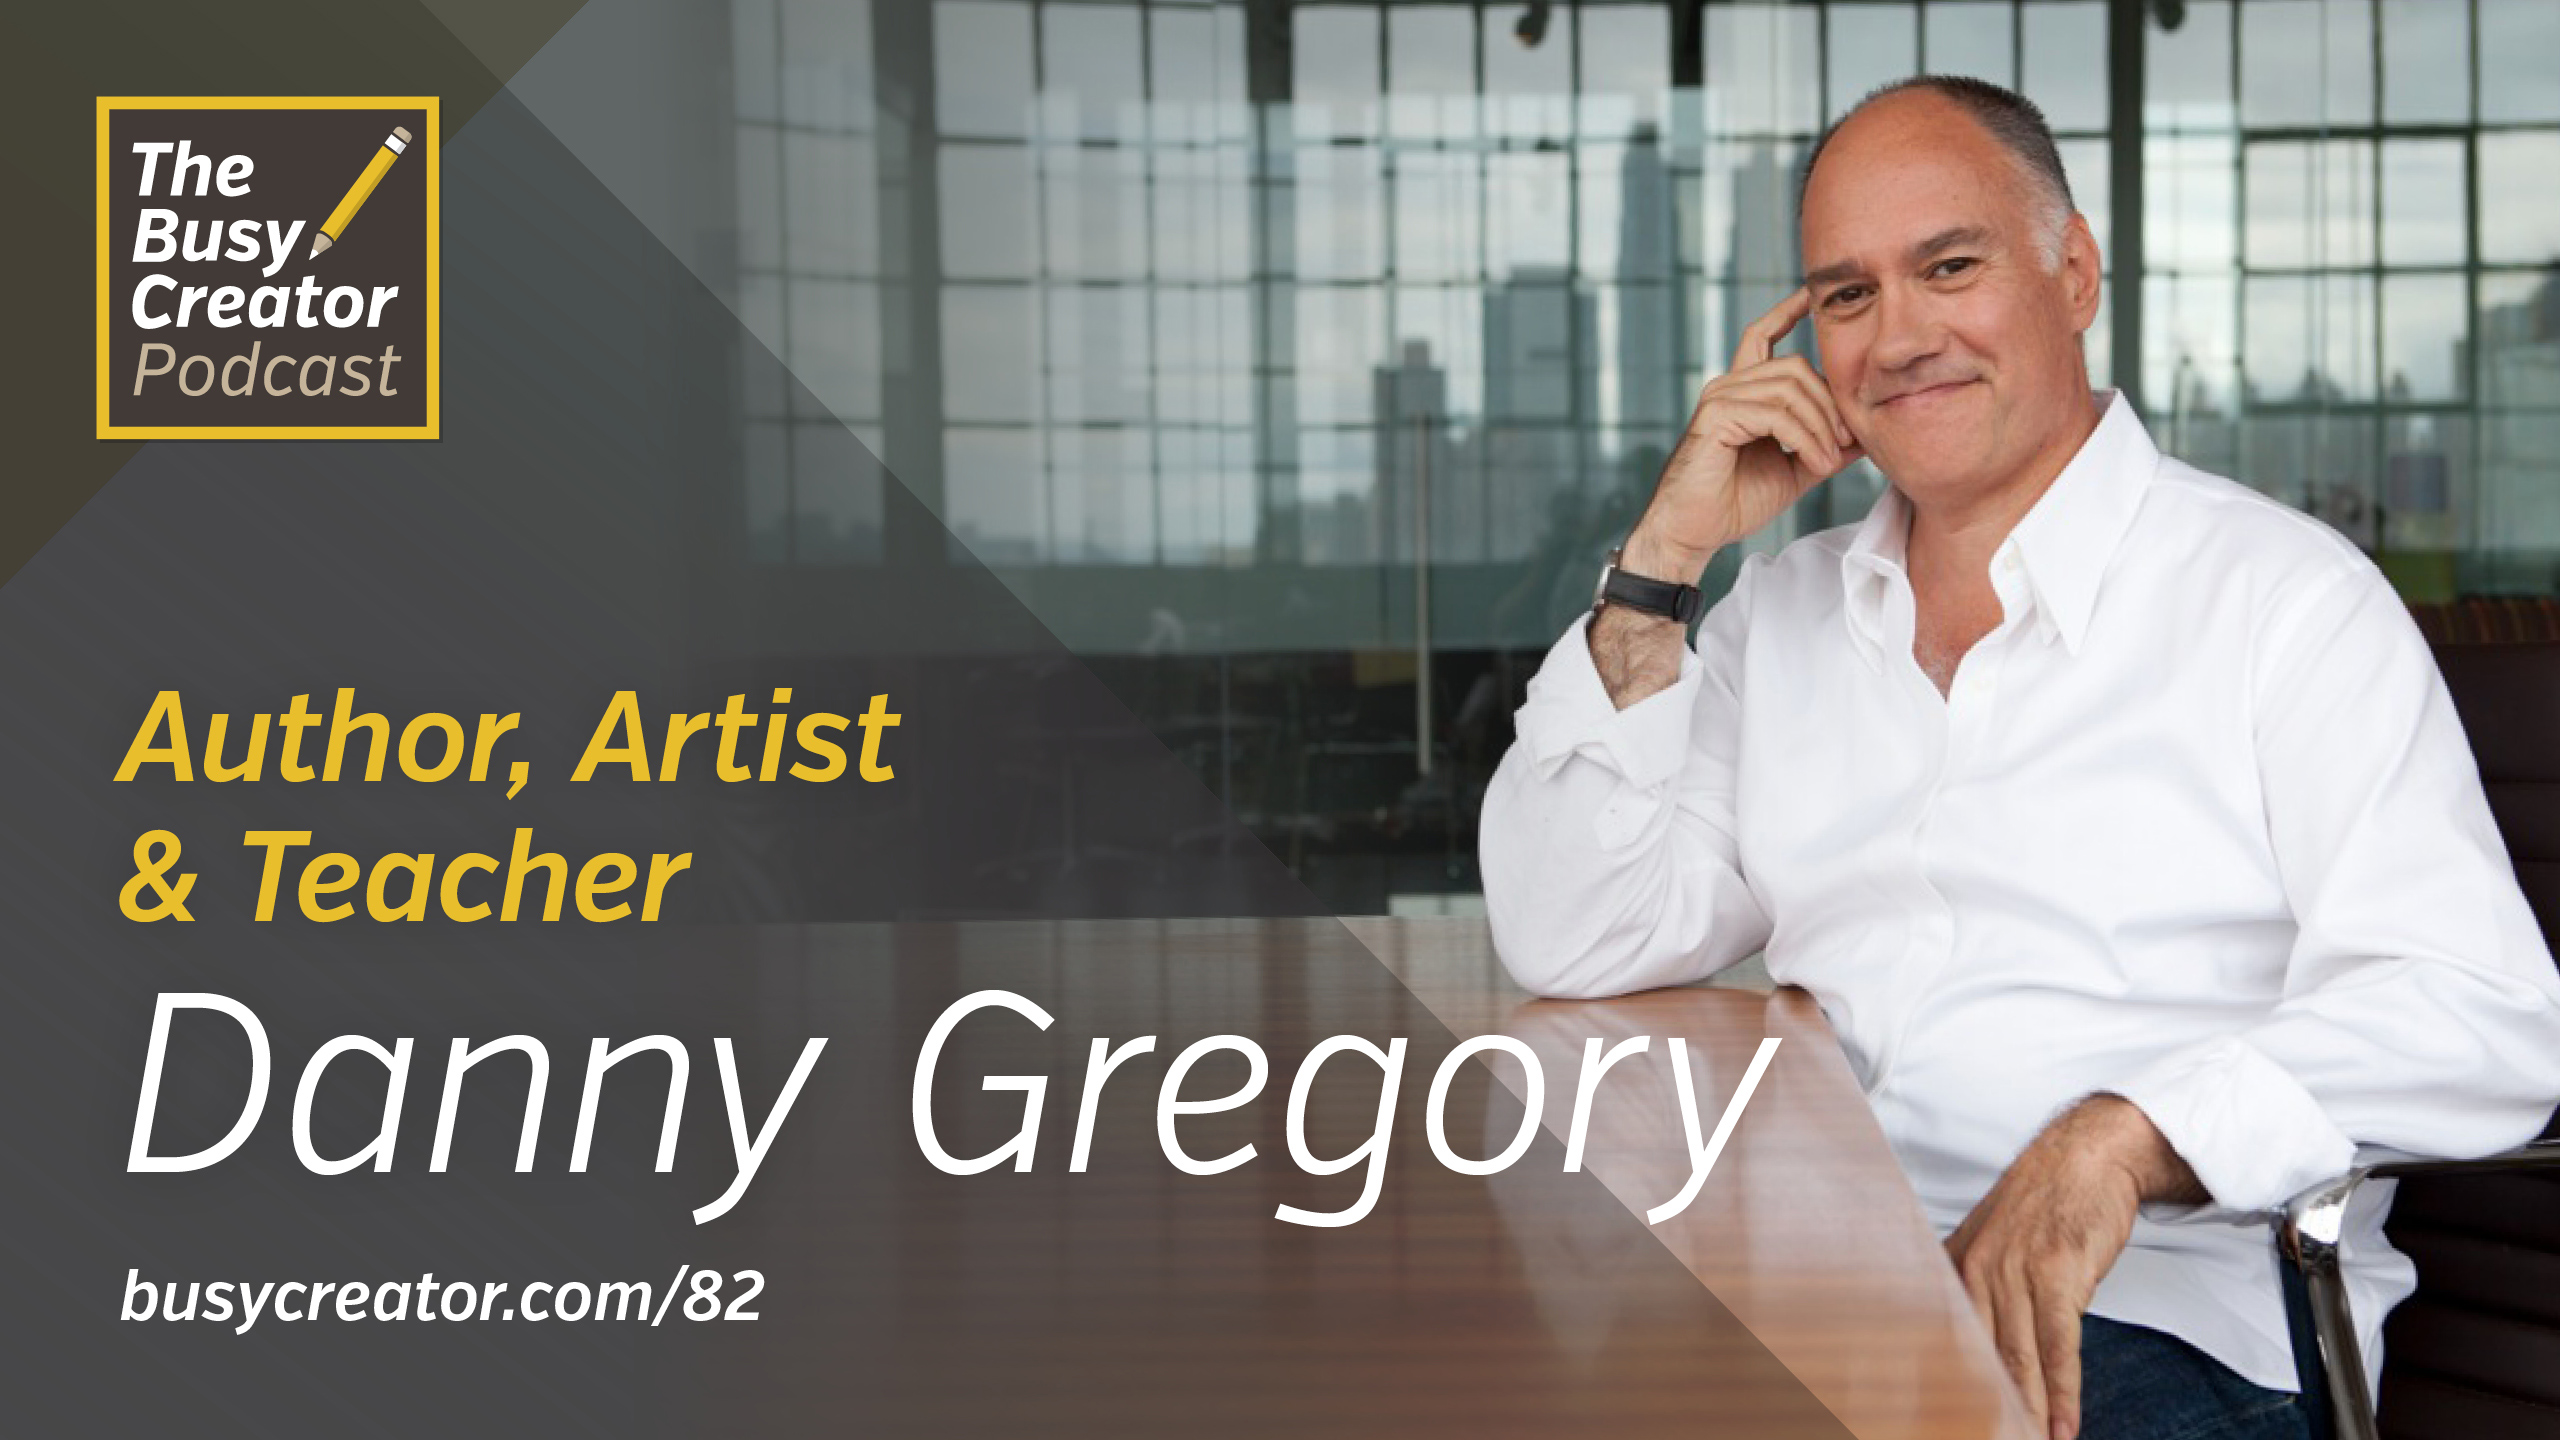 How to Identify and Control the Frustrating Voice In Your Head, with Author, Artist, & Teacher Danny Gregory